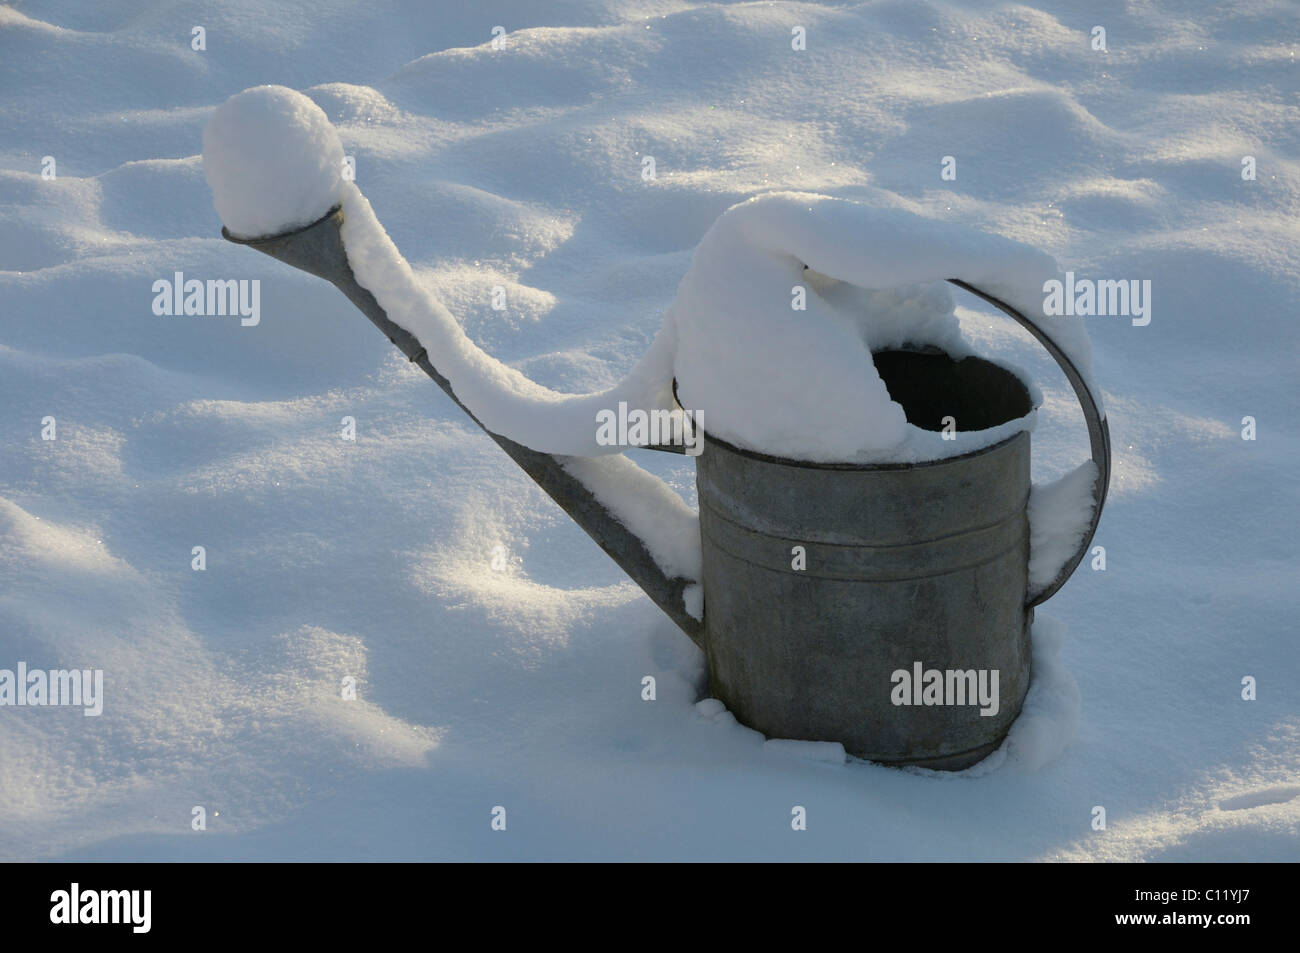 Watering can in the snow Stock Photo